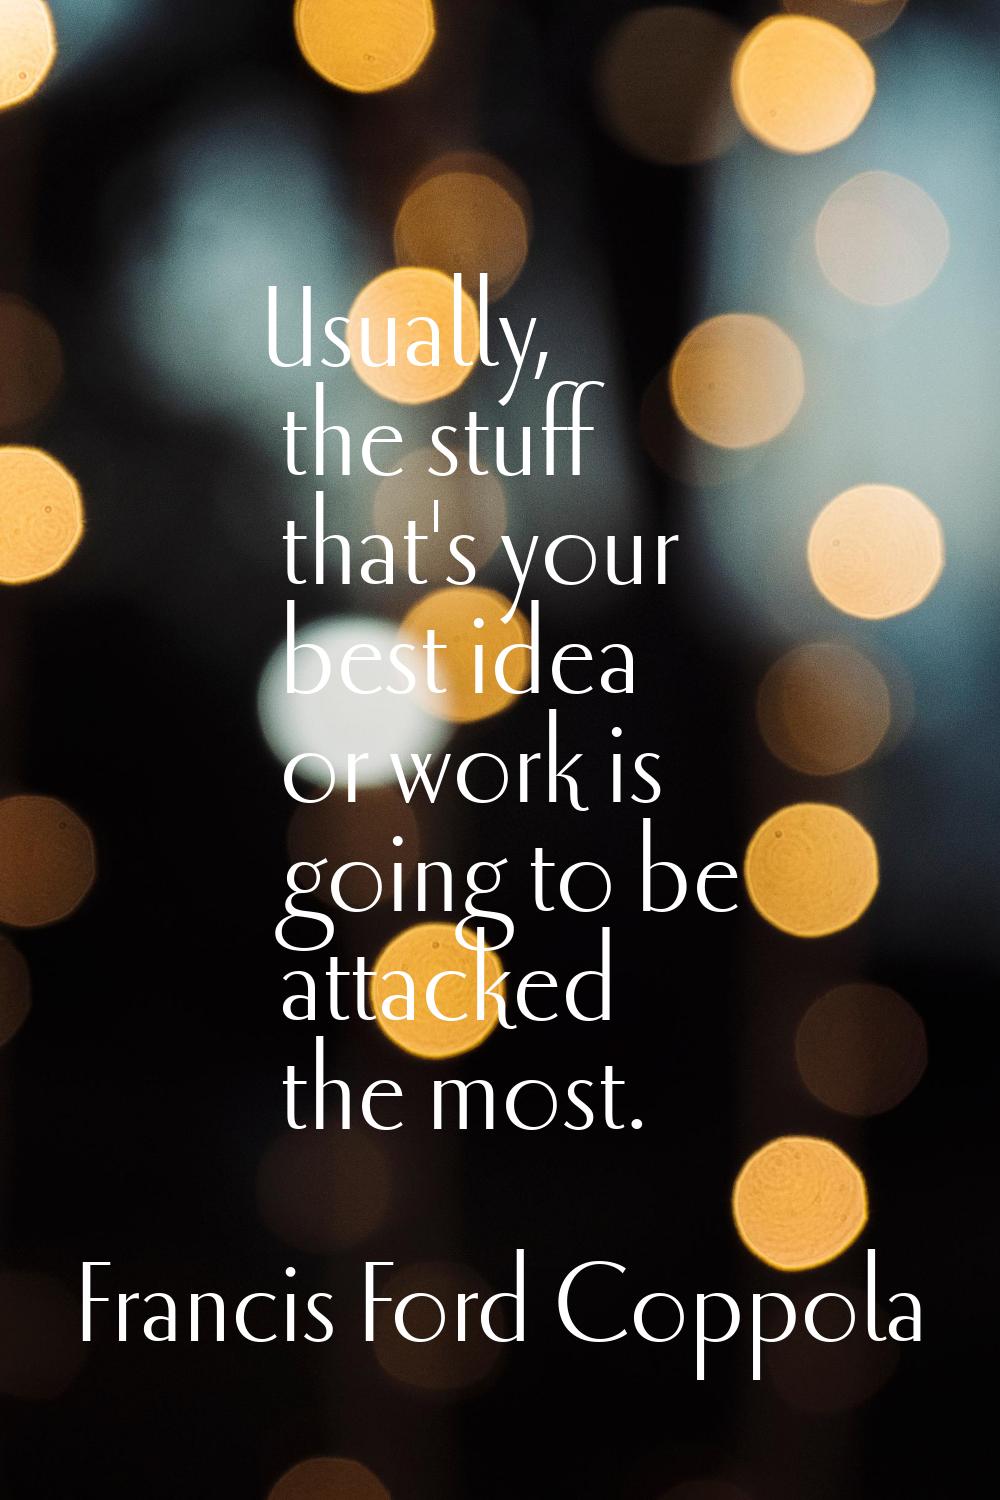 Usually, the stuff that's your best idea or work is going to be attacked the most.